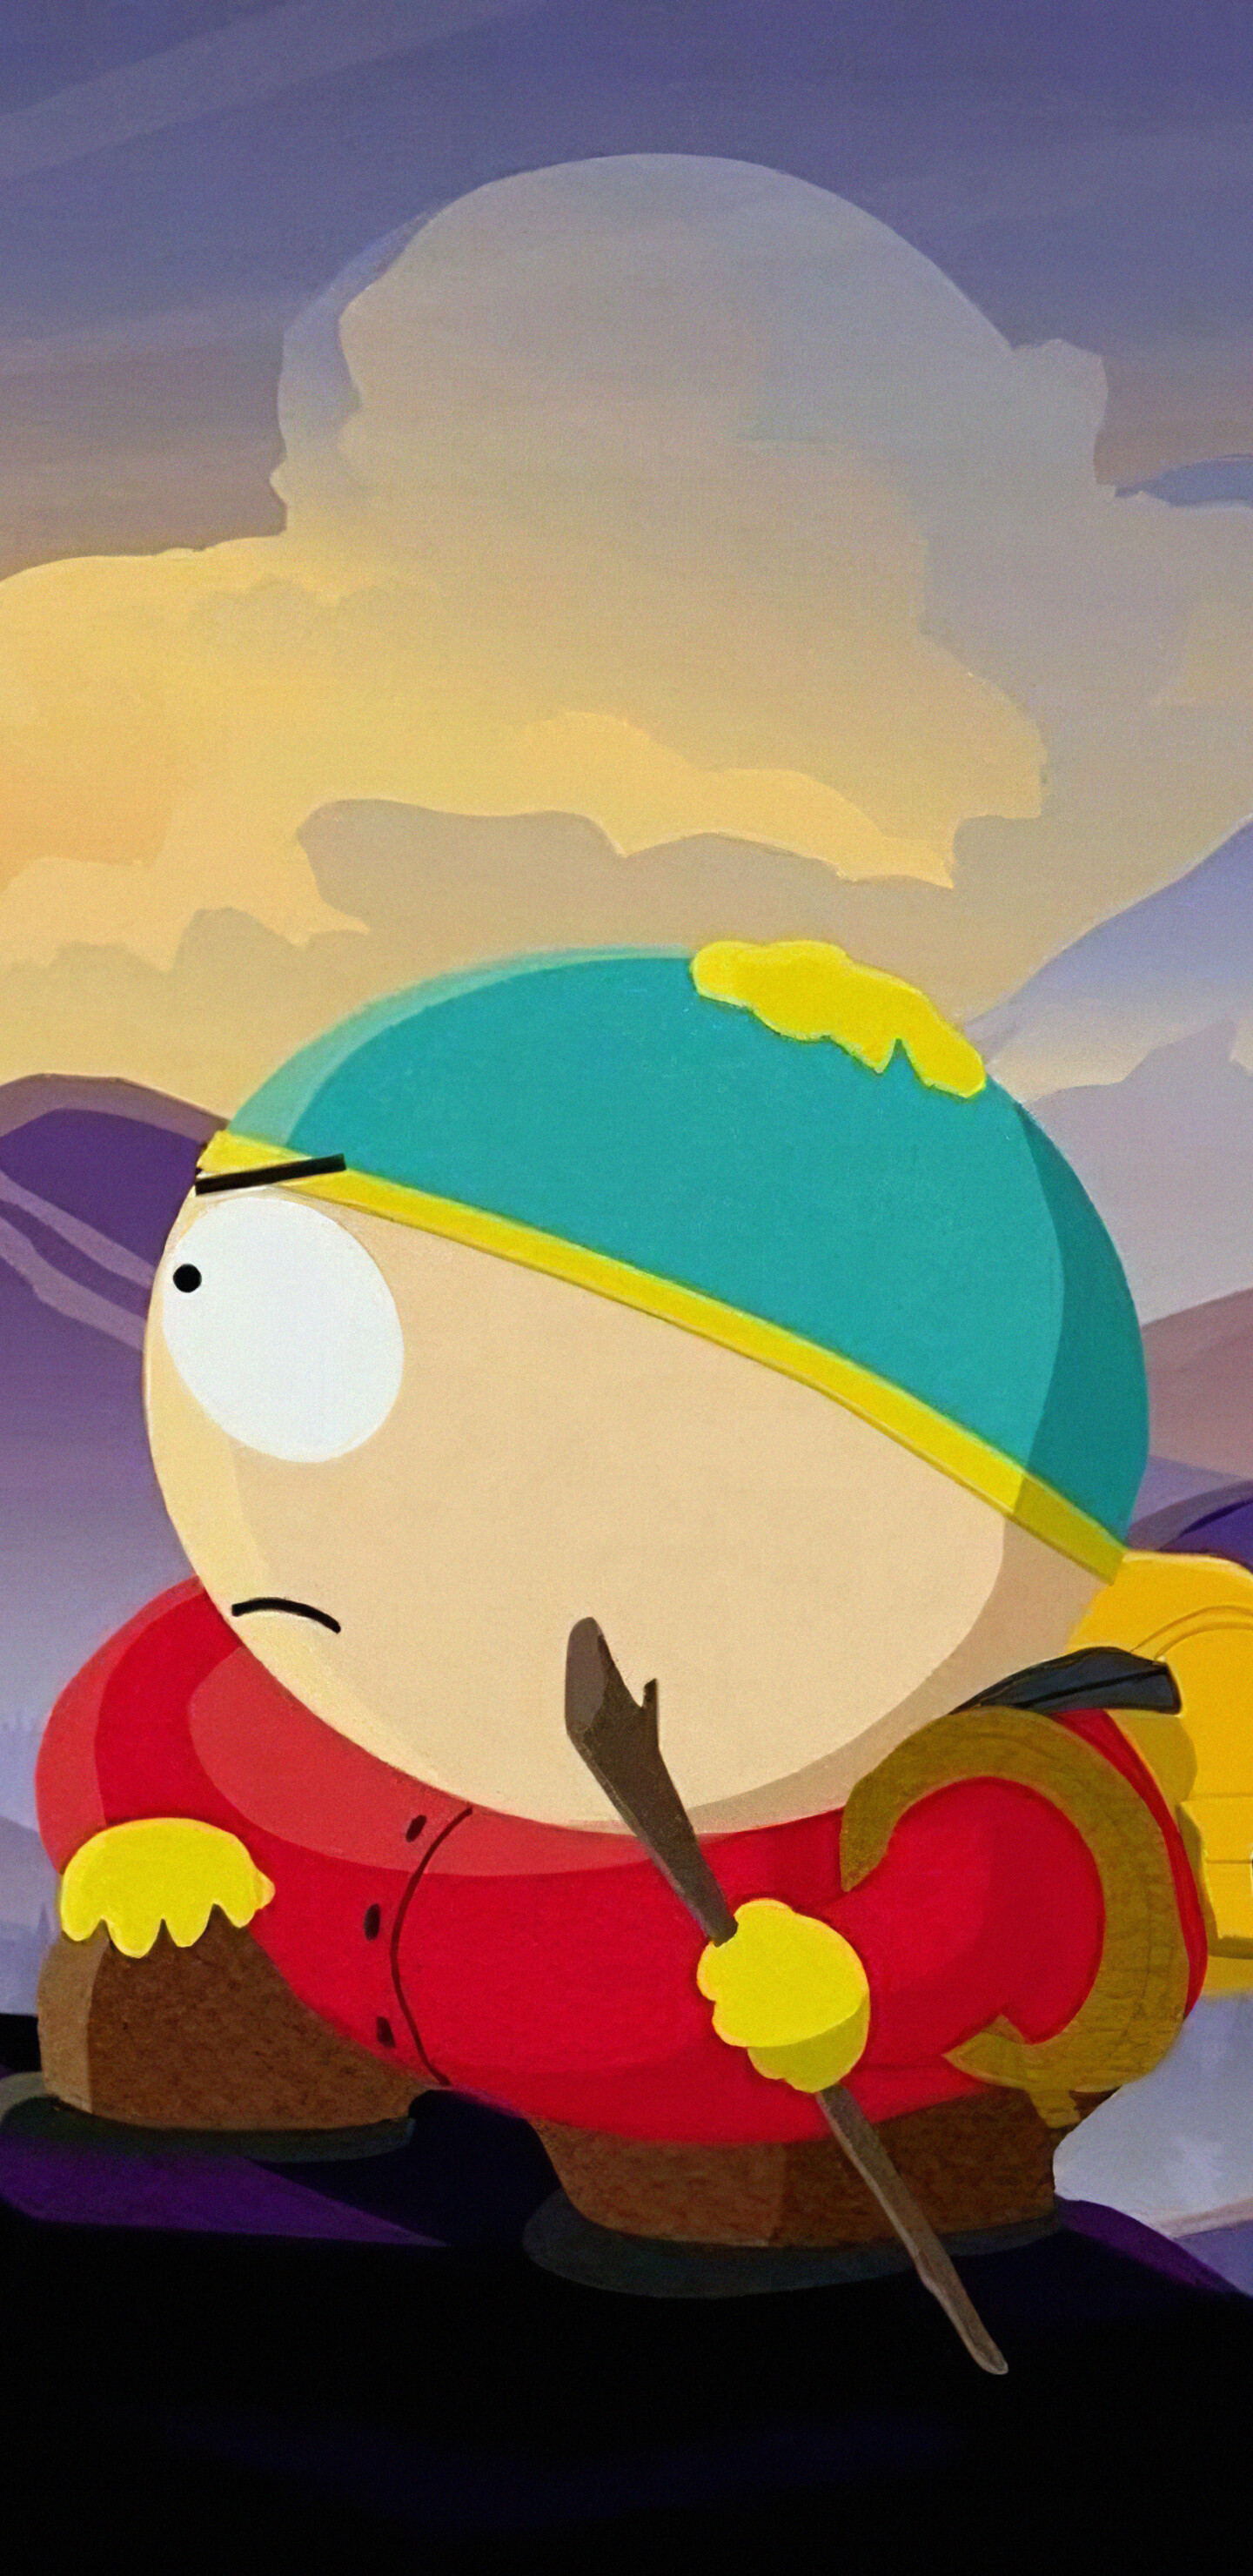 South Park: Eric Theodore Cartman, commonly referred to by his surname Cartman. 1440x2960 HD Background.